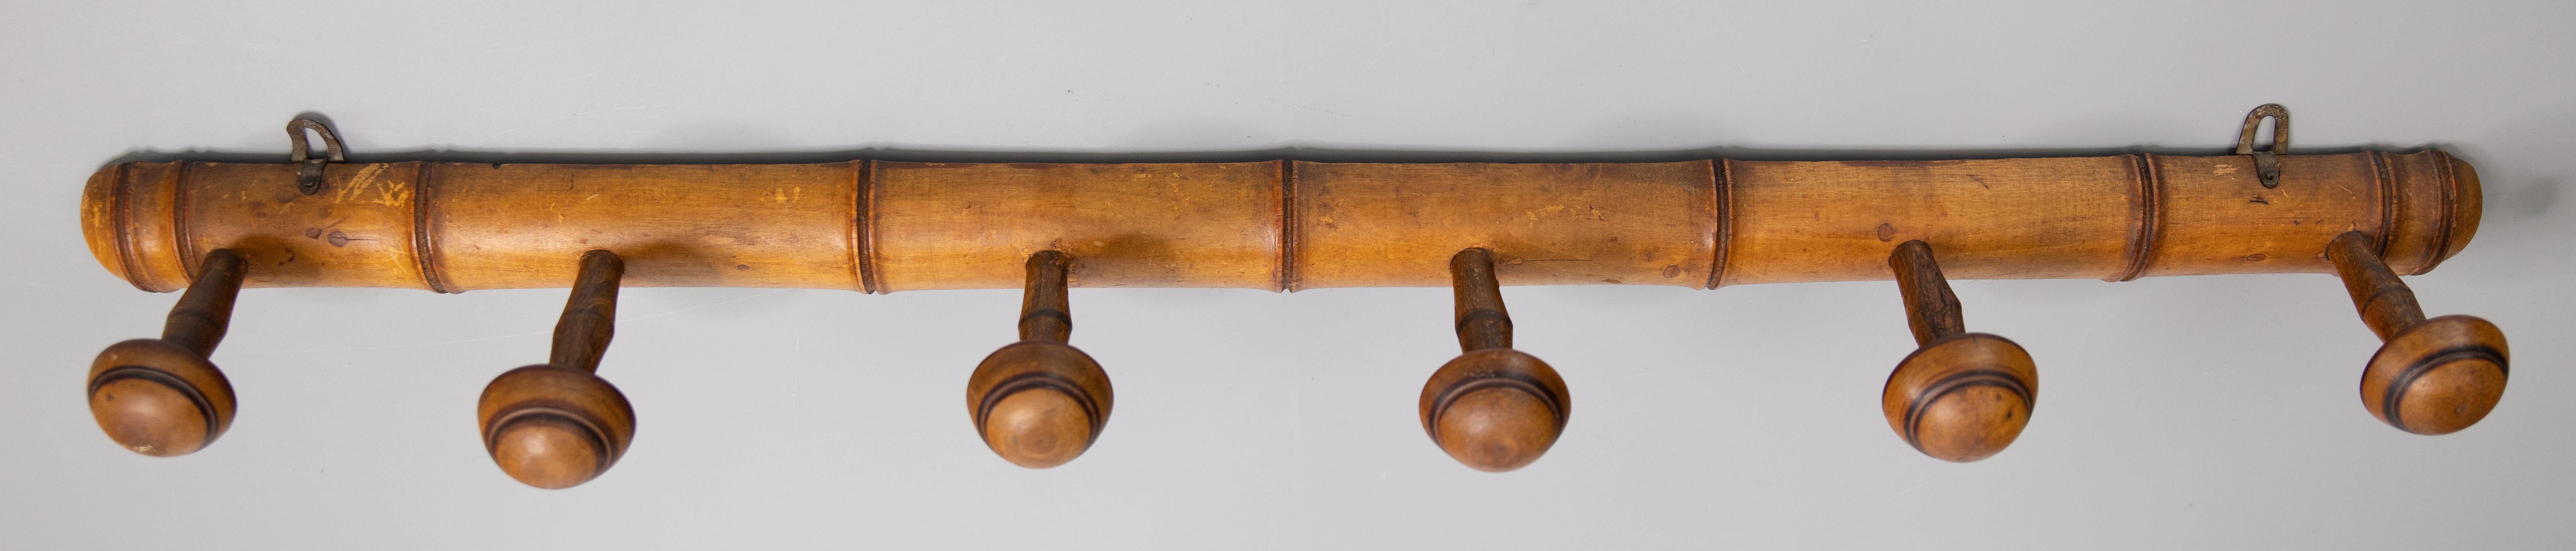 A superb antique French faux bamboo carved wood coat rack, circa 1920. This fine rack is a nice large size and retains the lovely original surface and patina with six hand turned pegs, perfect for hanging jackets and hats in an entryway or